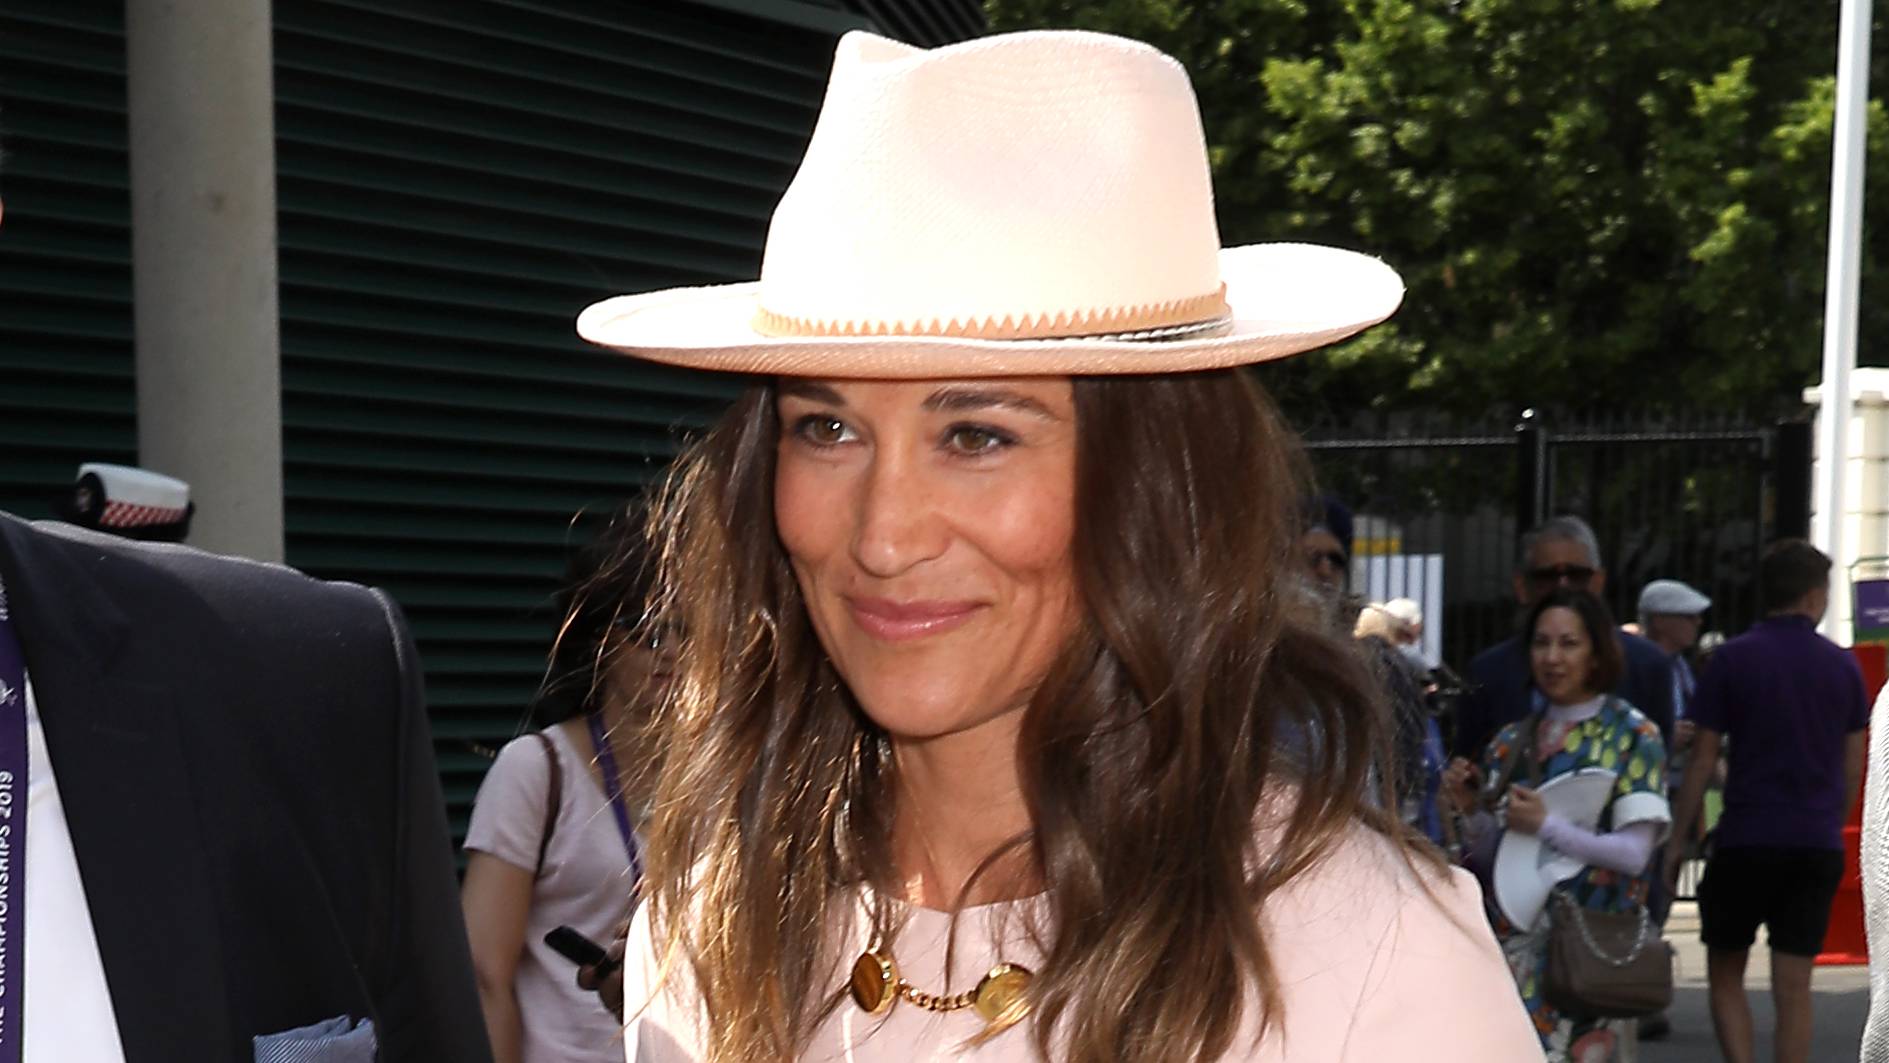 Court-side fashion: Pippa Middleton pretty in pink at Wimbledon 